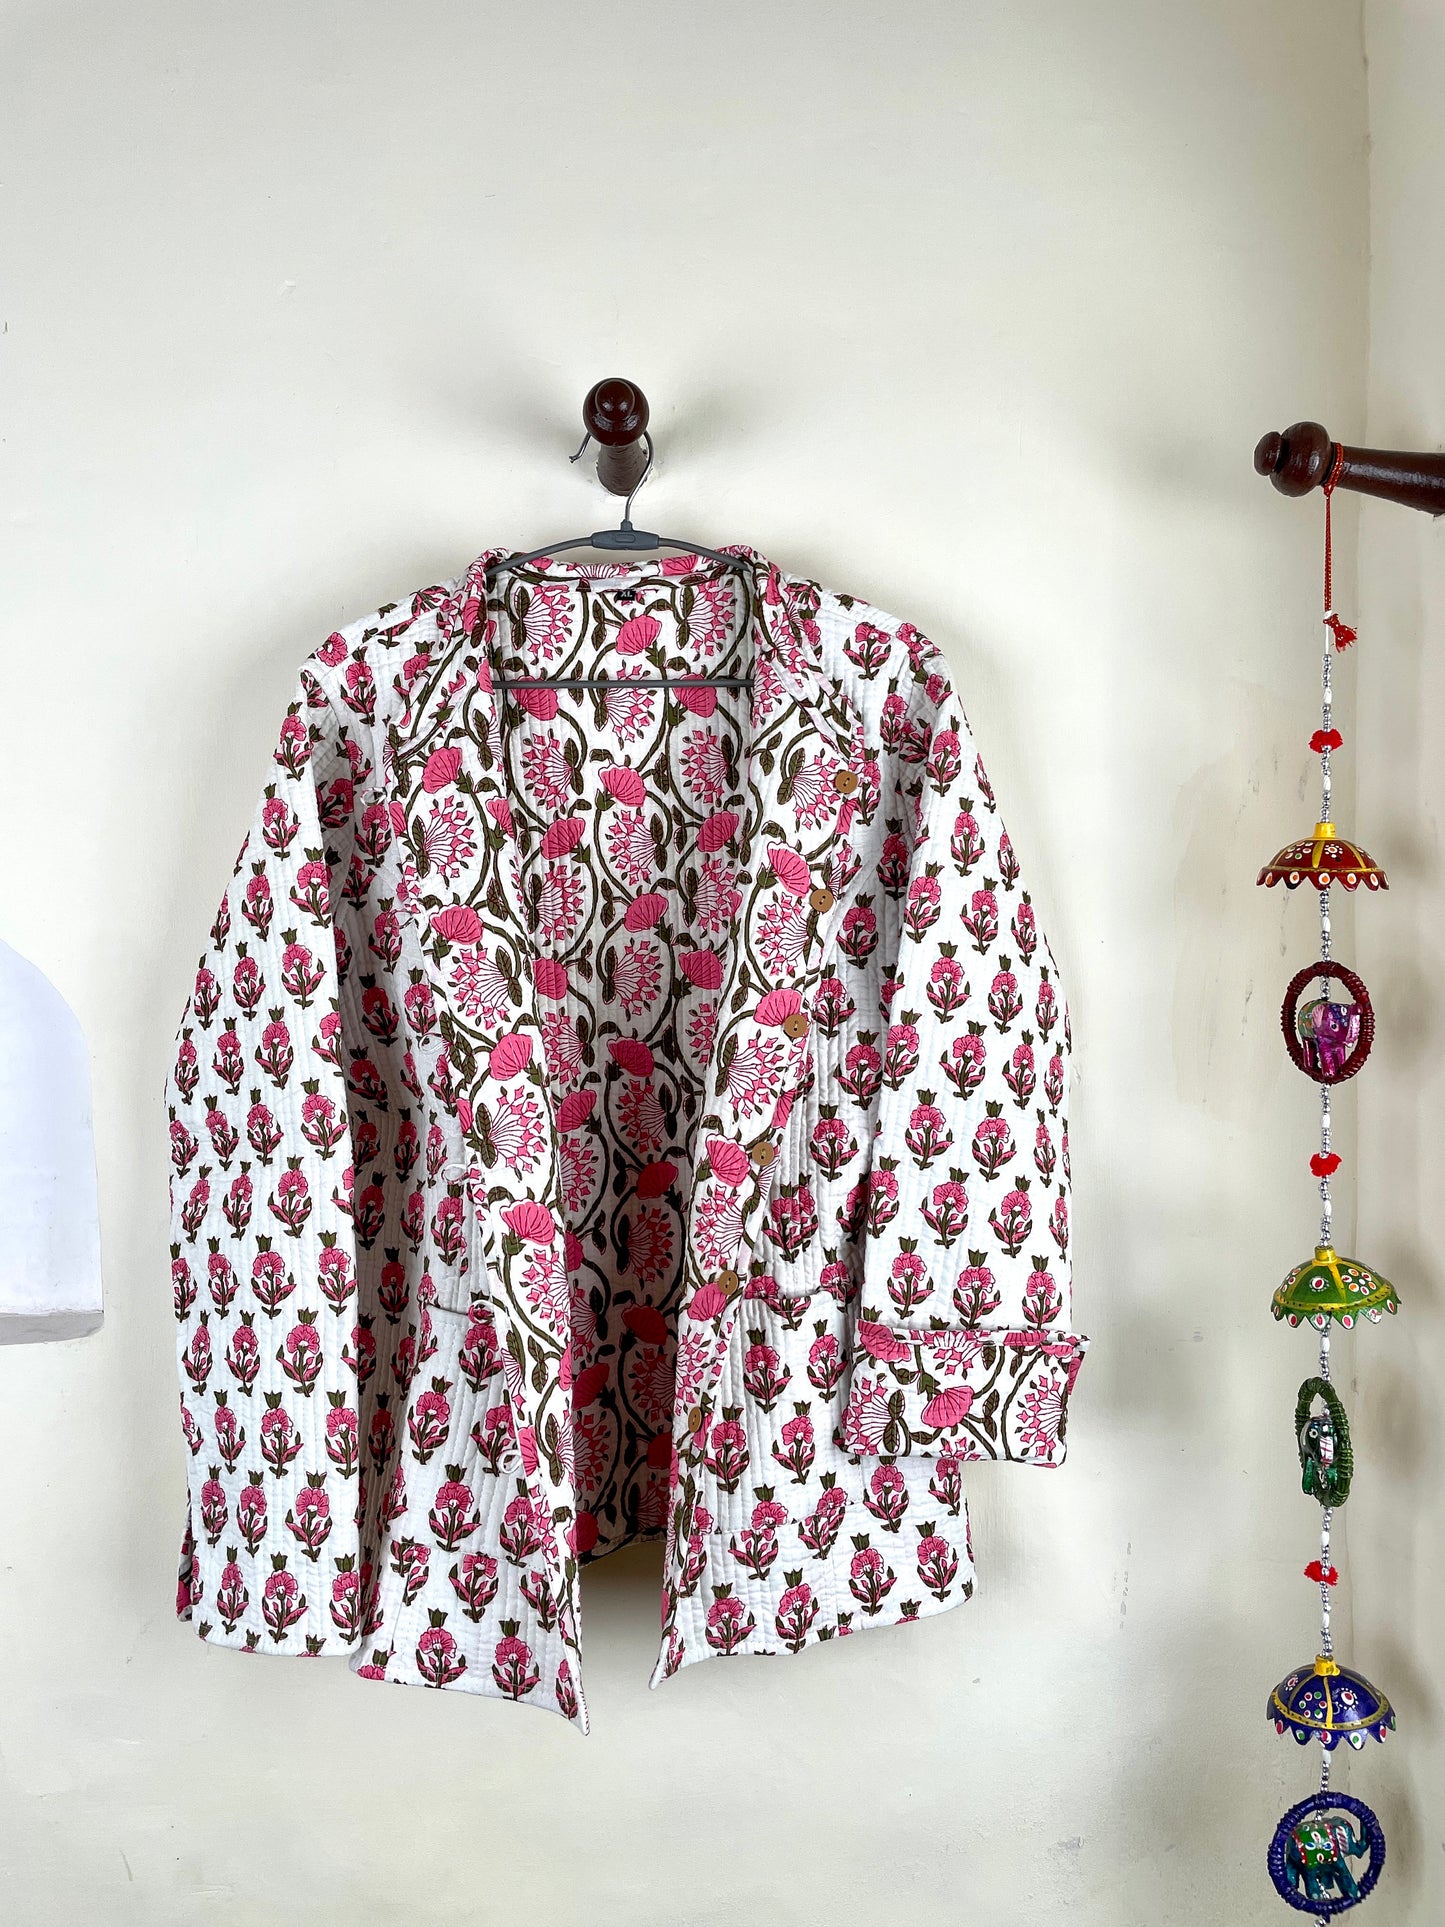 Indian Handmade Quilted Cotton Fabric Jacket Stylish White & Pink Floral Women's Coat, Reversible Waistcoat, Christmas Gift for Her